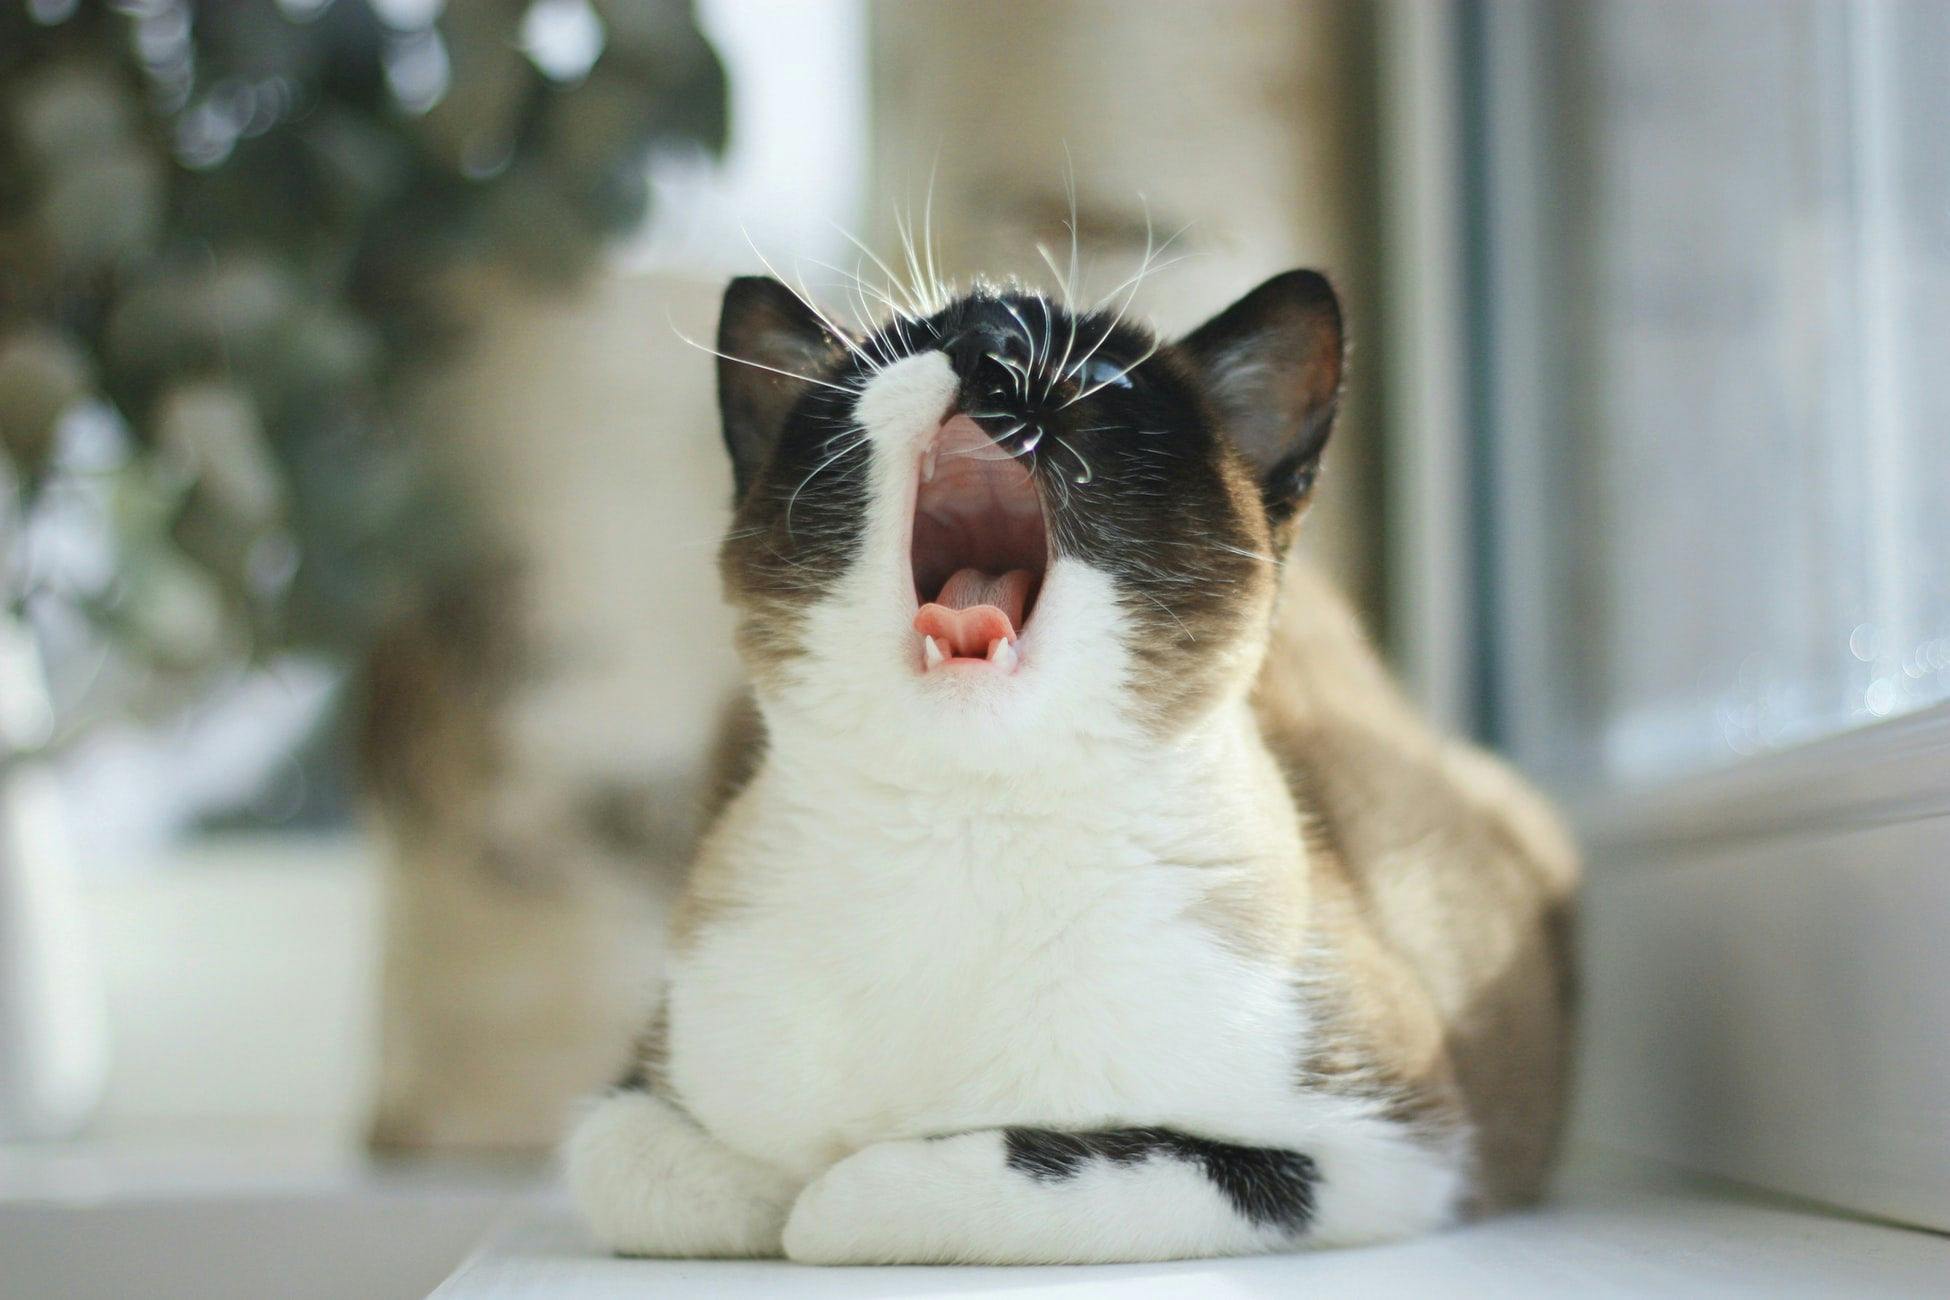 Bad Breath in Cats